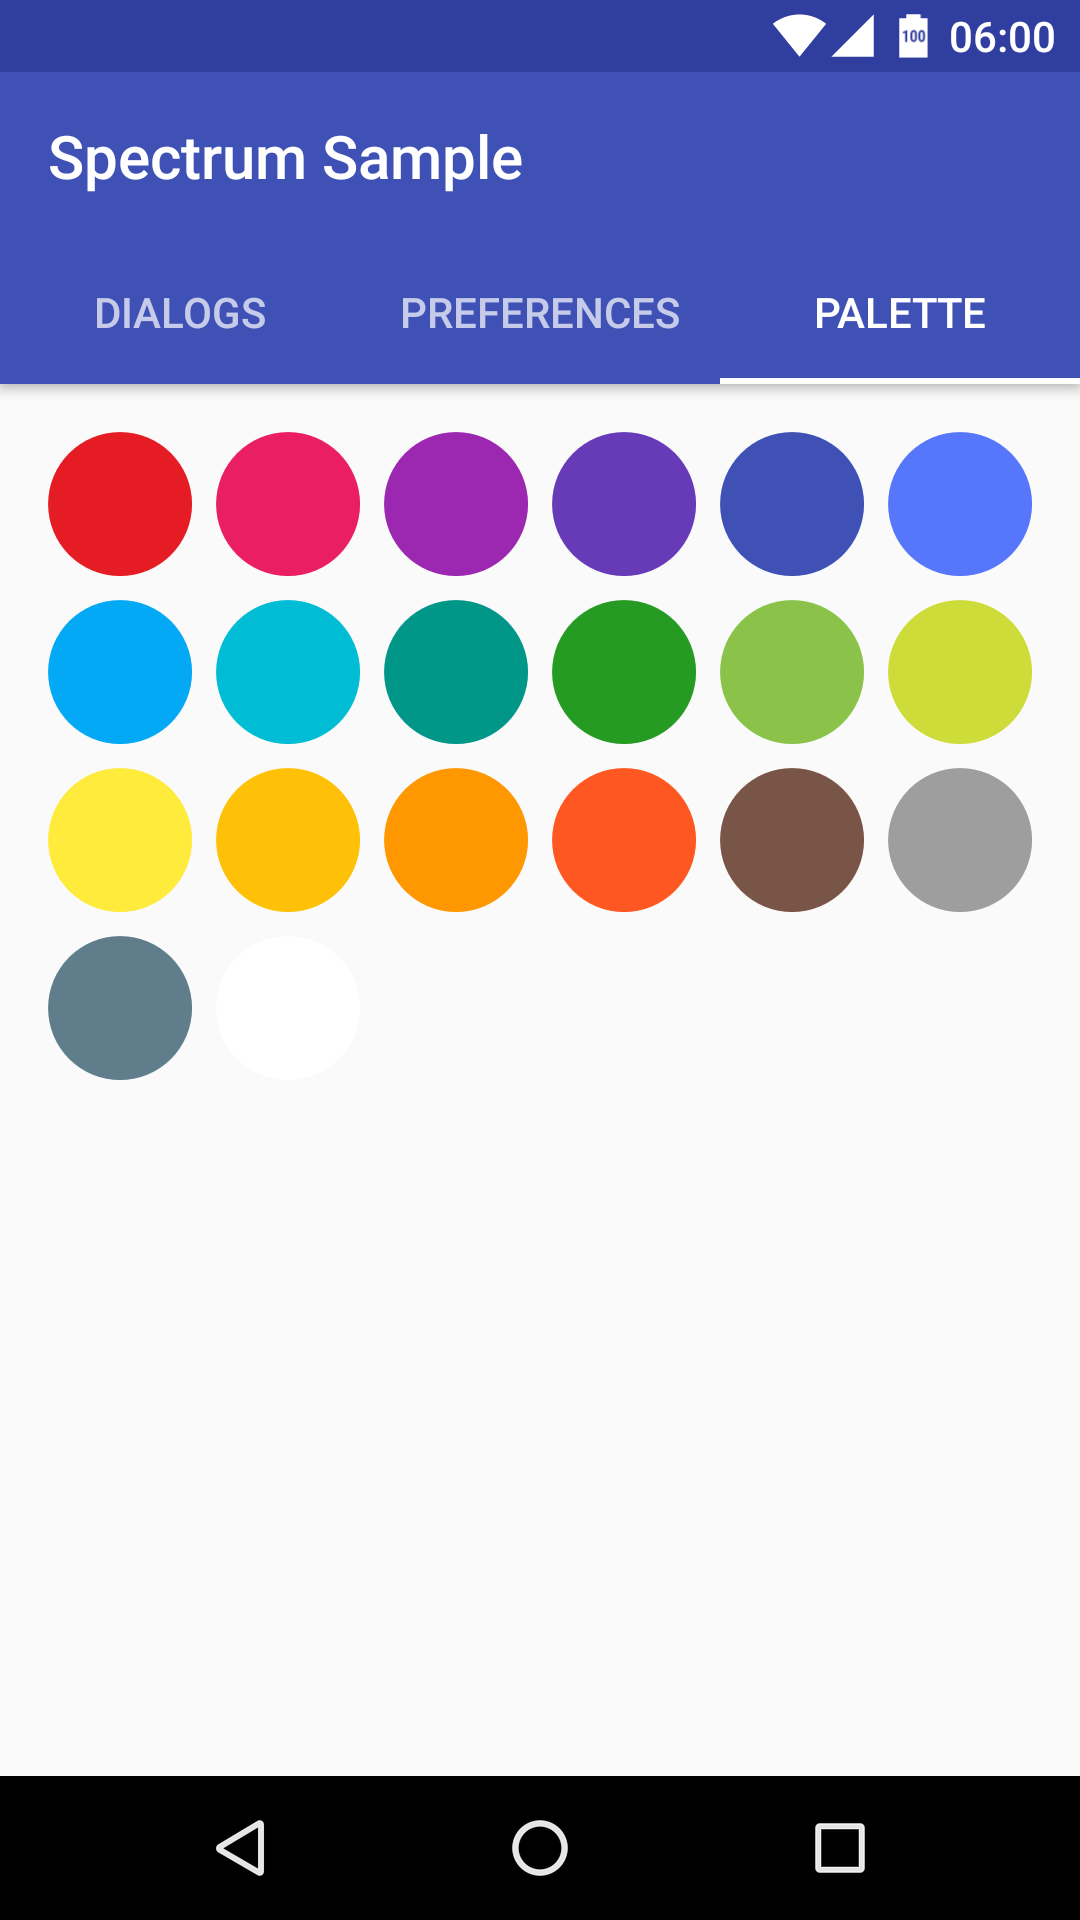 Picker github color android Color Picker